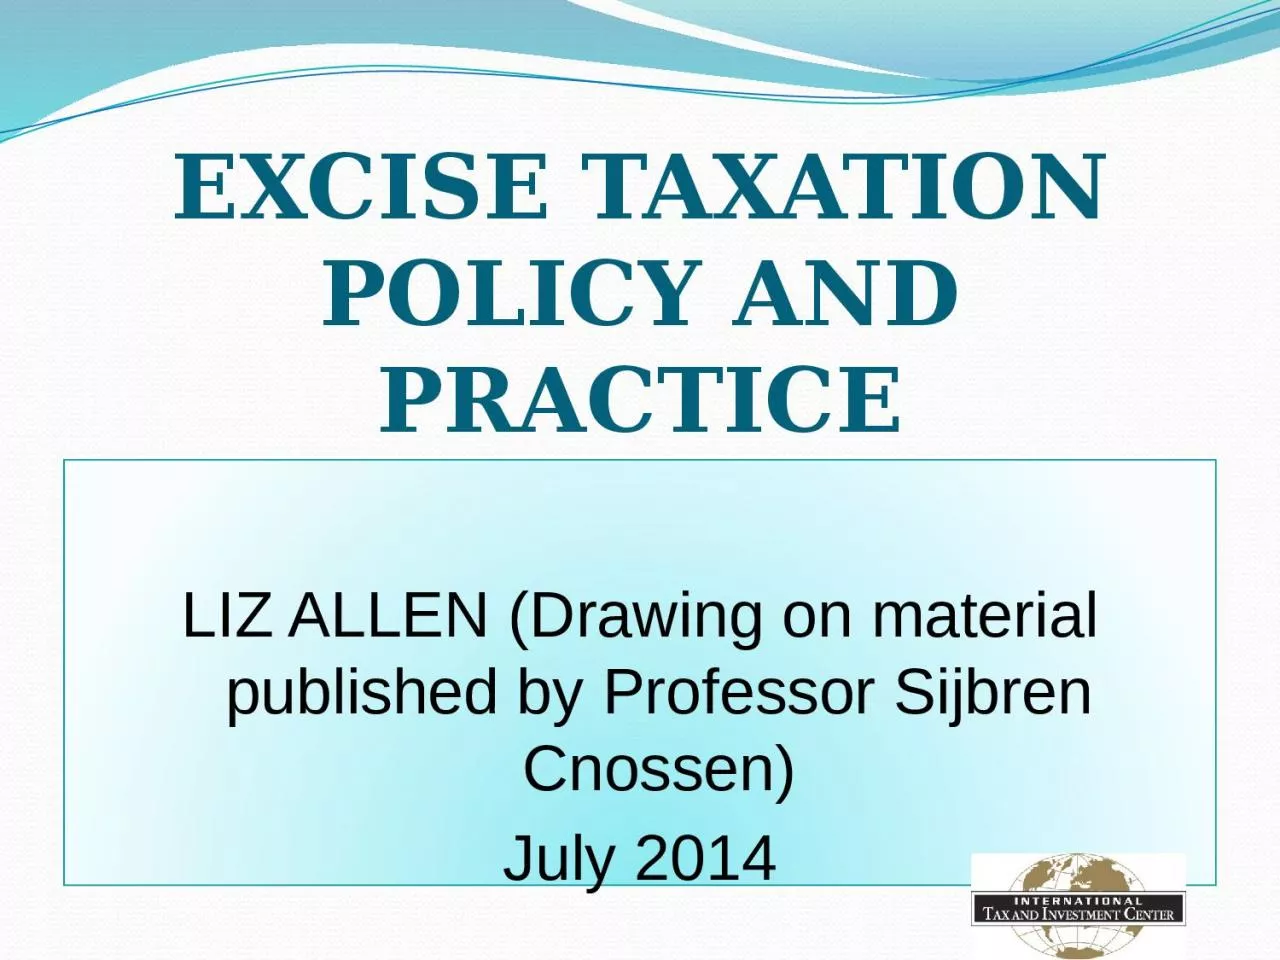 EXCISE TAXATION POLICY AND PRACTICE